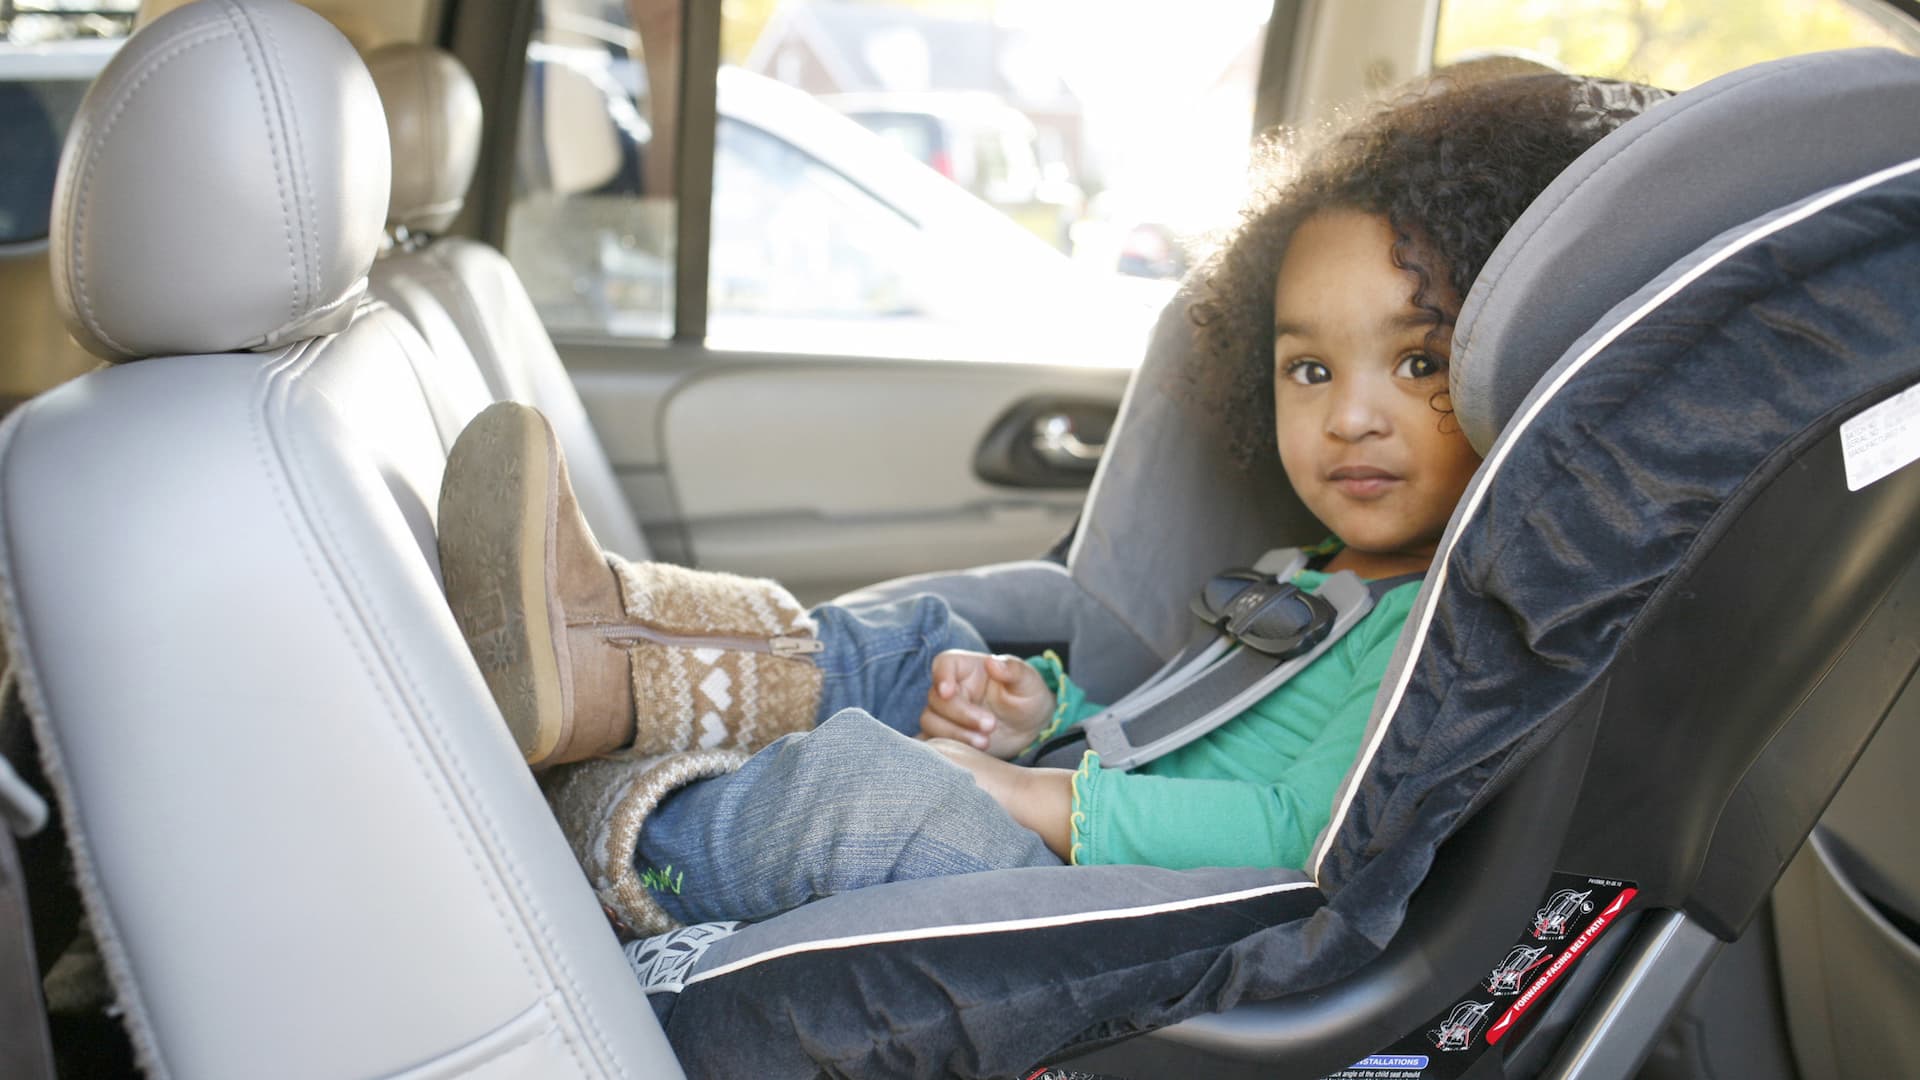 Winter Coats in Car Seats Are Dangerous. So, How Can You Keep Your